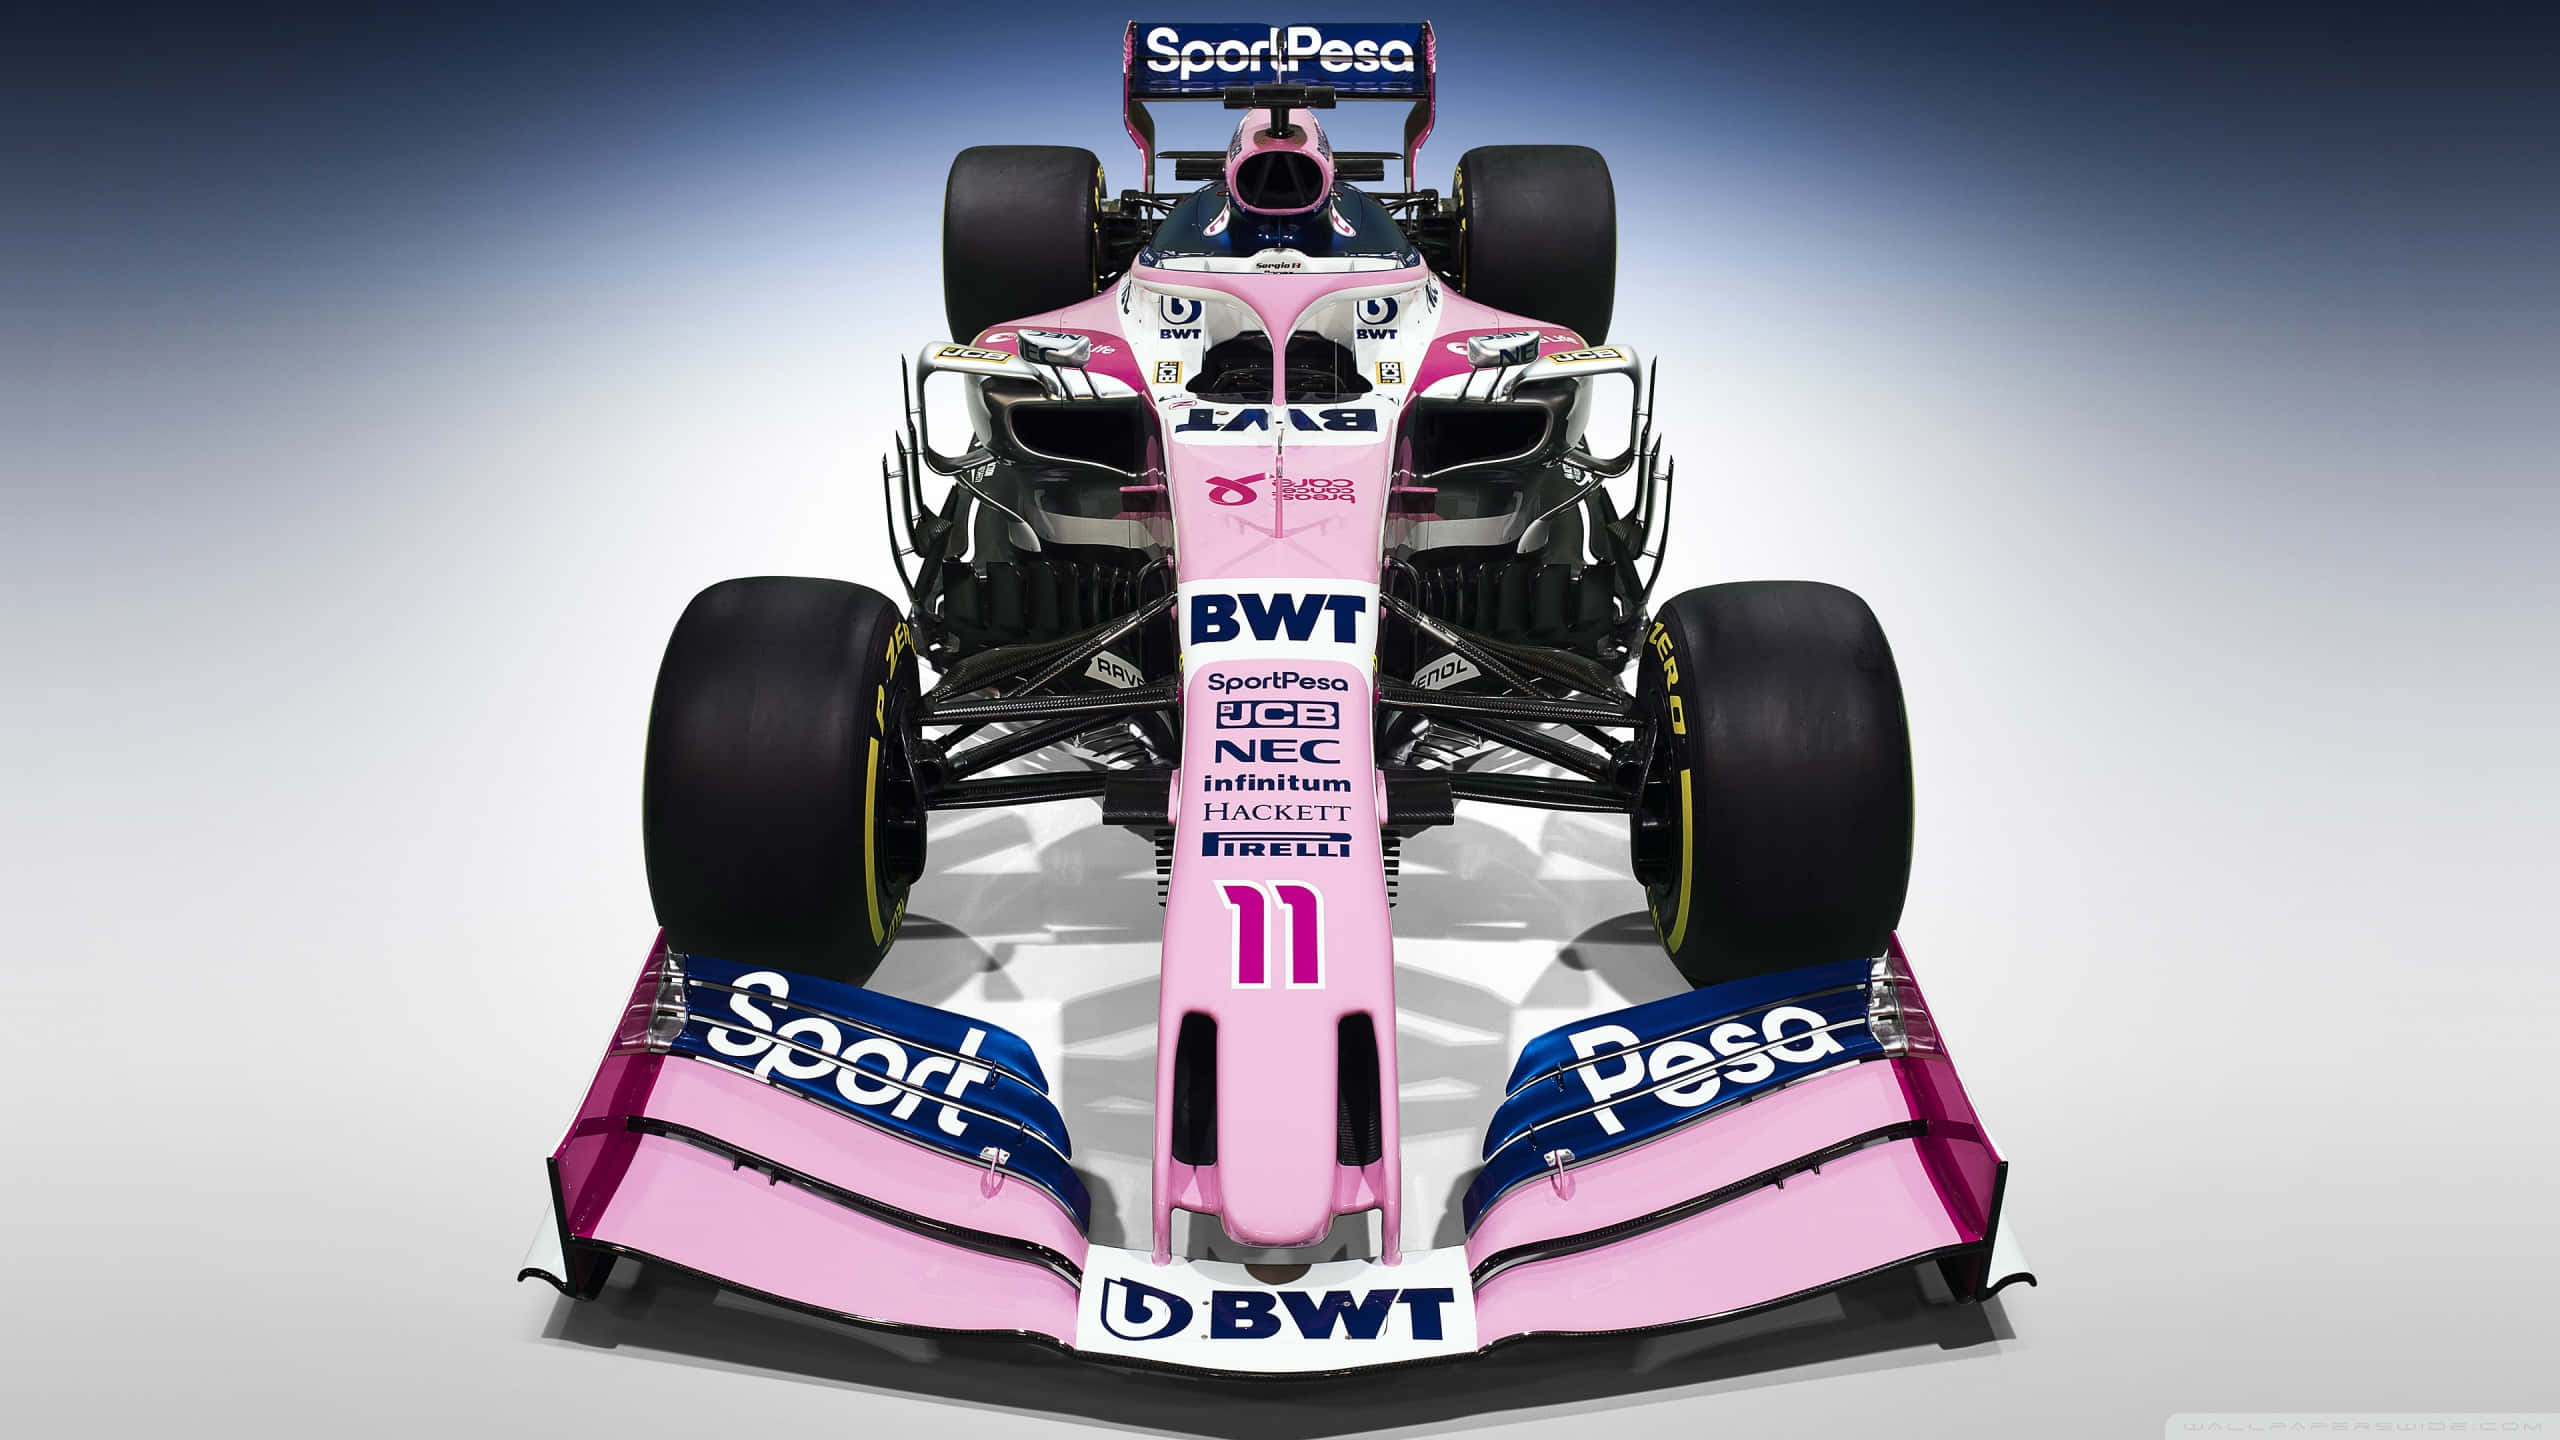 A Pink Racing Car With The Number 1 On It